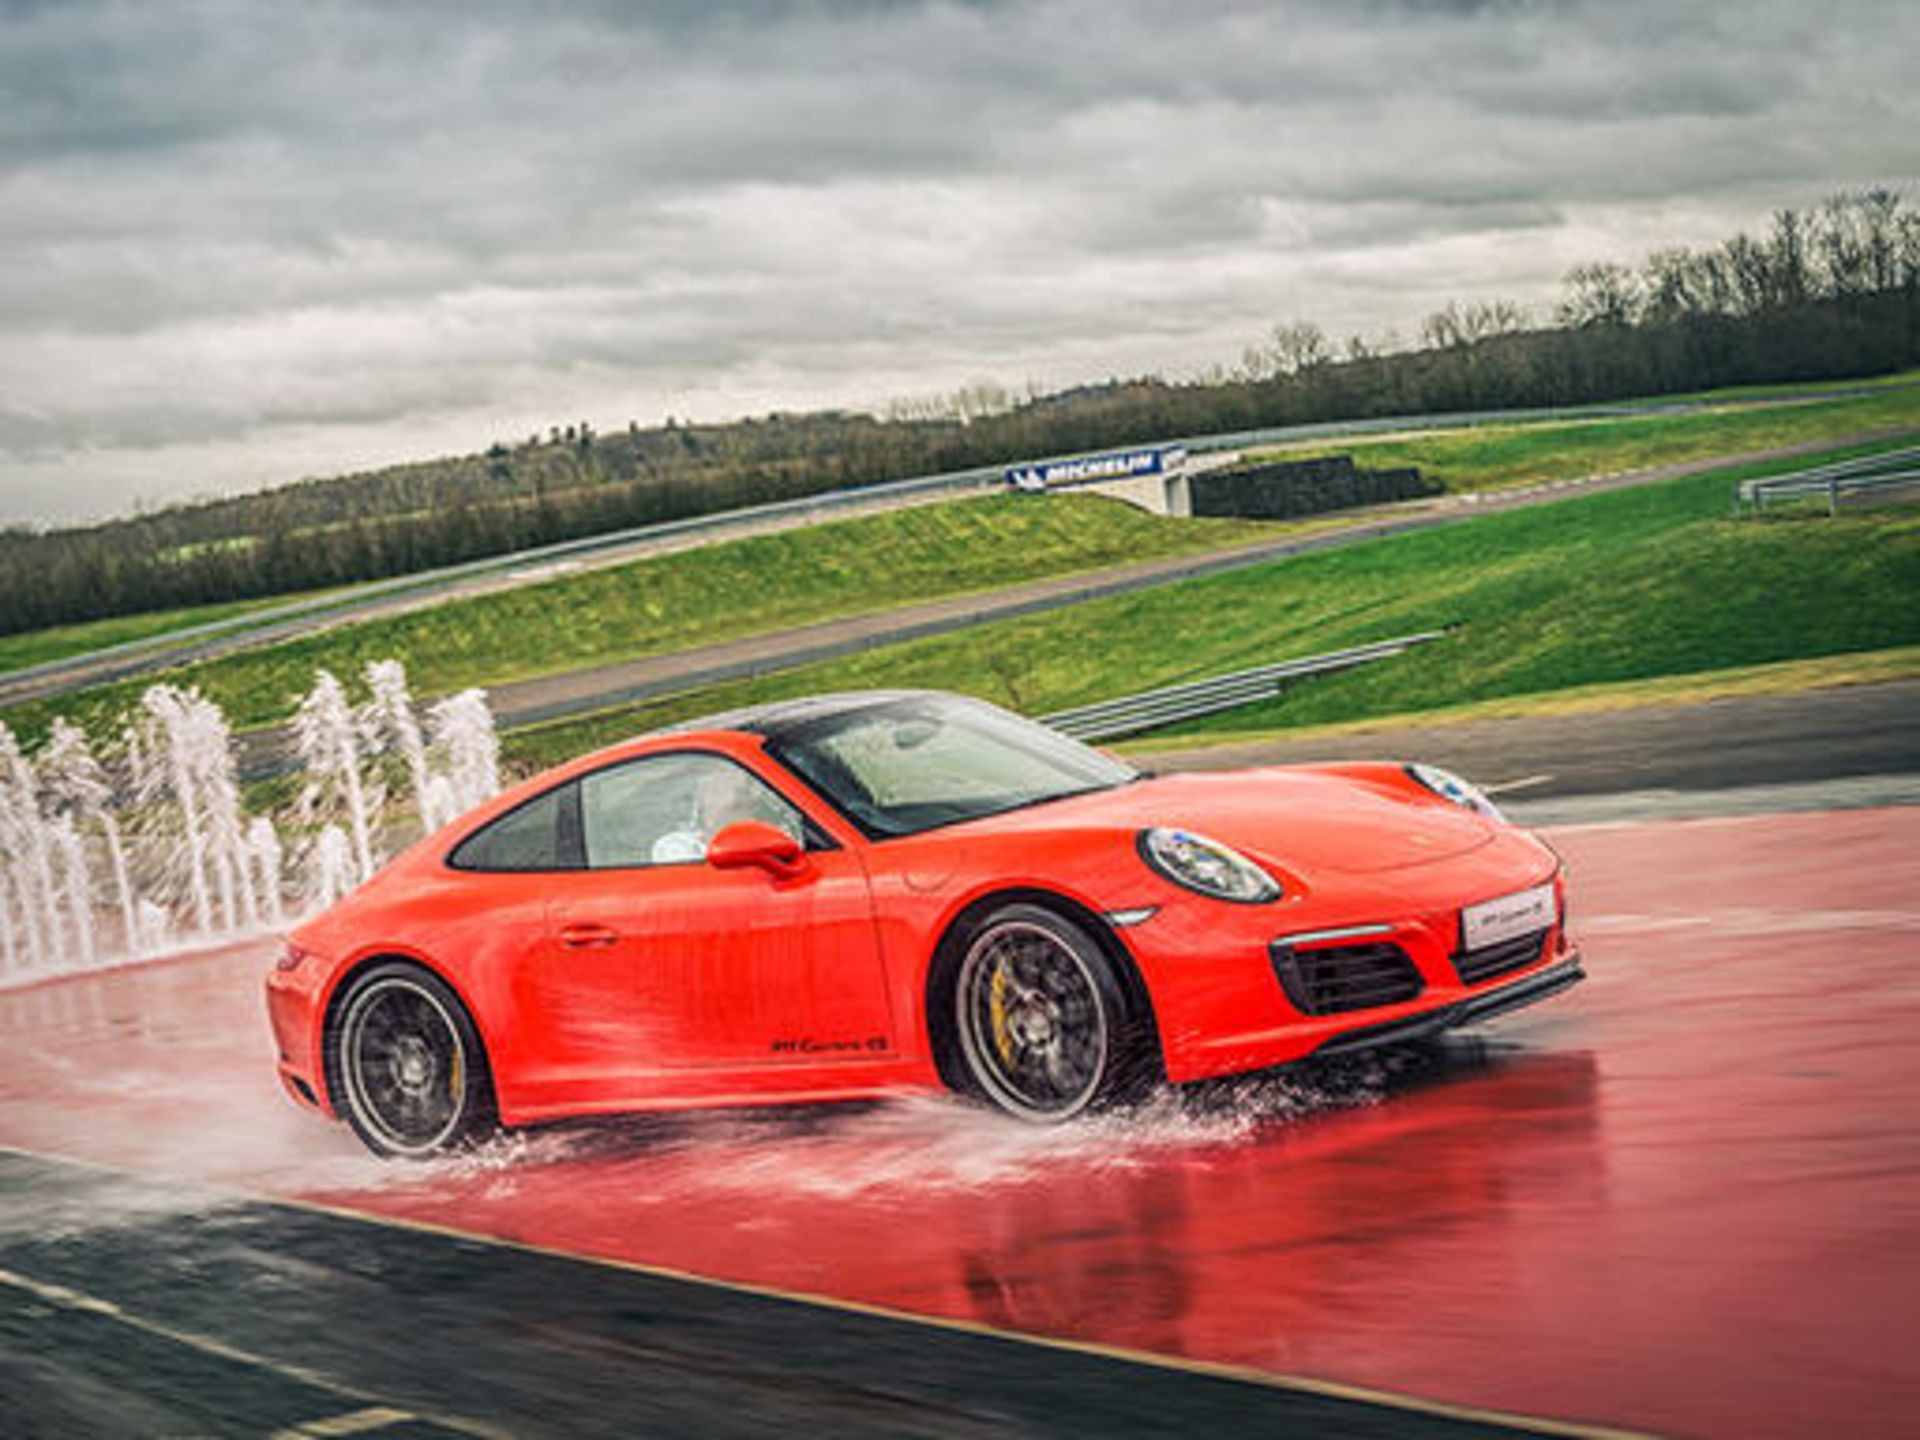 OFFICIAL PORSCHE SILVERSTONE DRIVING EXPERIENCE WITH LUNCH - DECEMBER 23 BOOKING - NO VAT! - Image 2 of 4